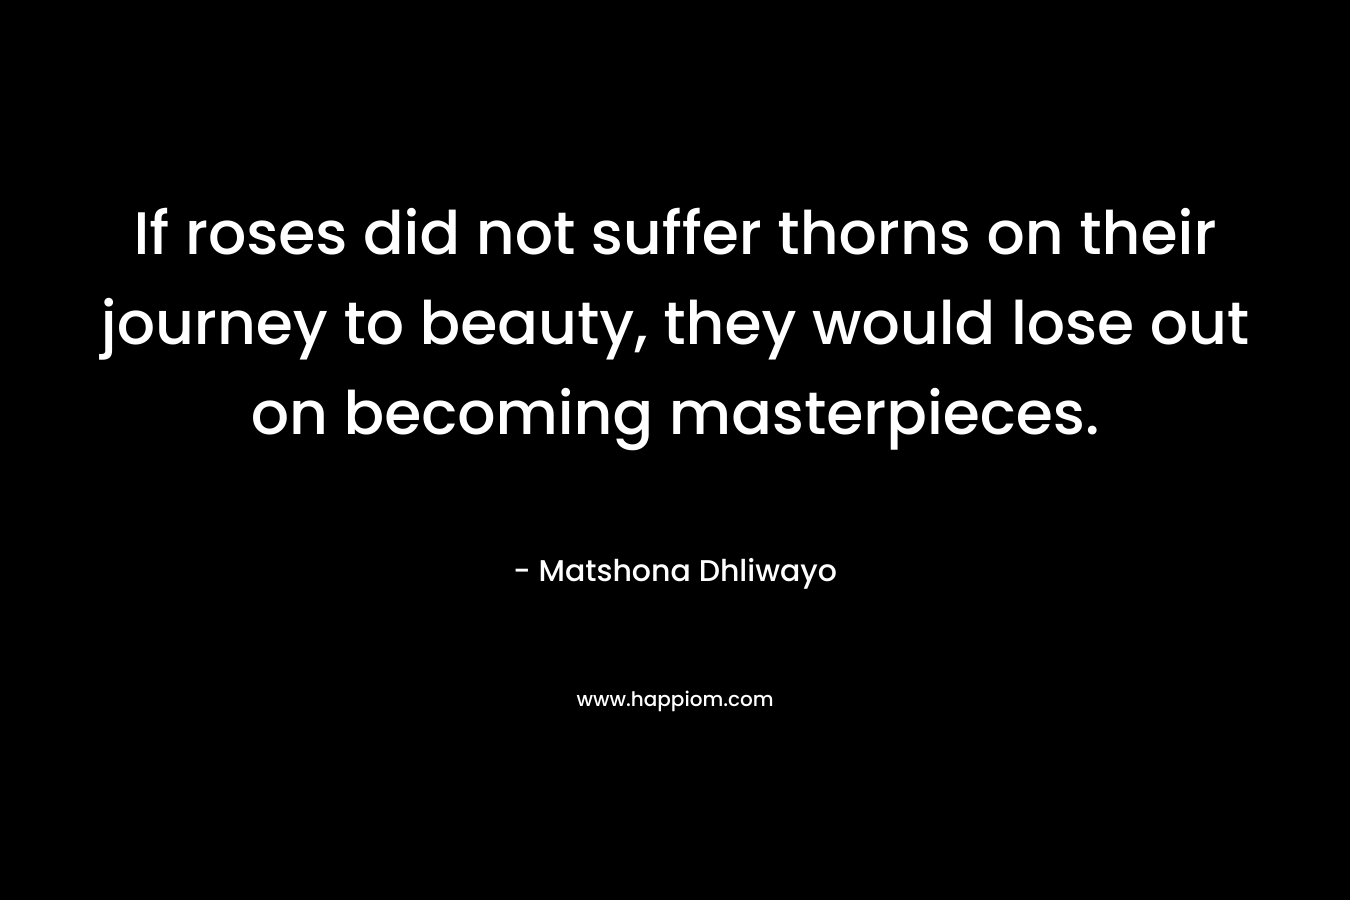 If roses did not suffer thorns on their journey to beauty, they would lose out on becoming masterpieces. – Matshona Dhliwayo